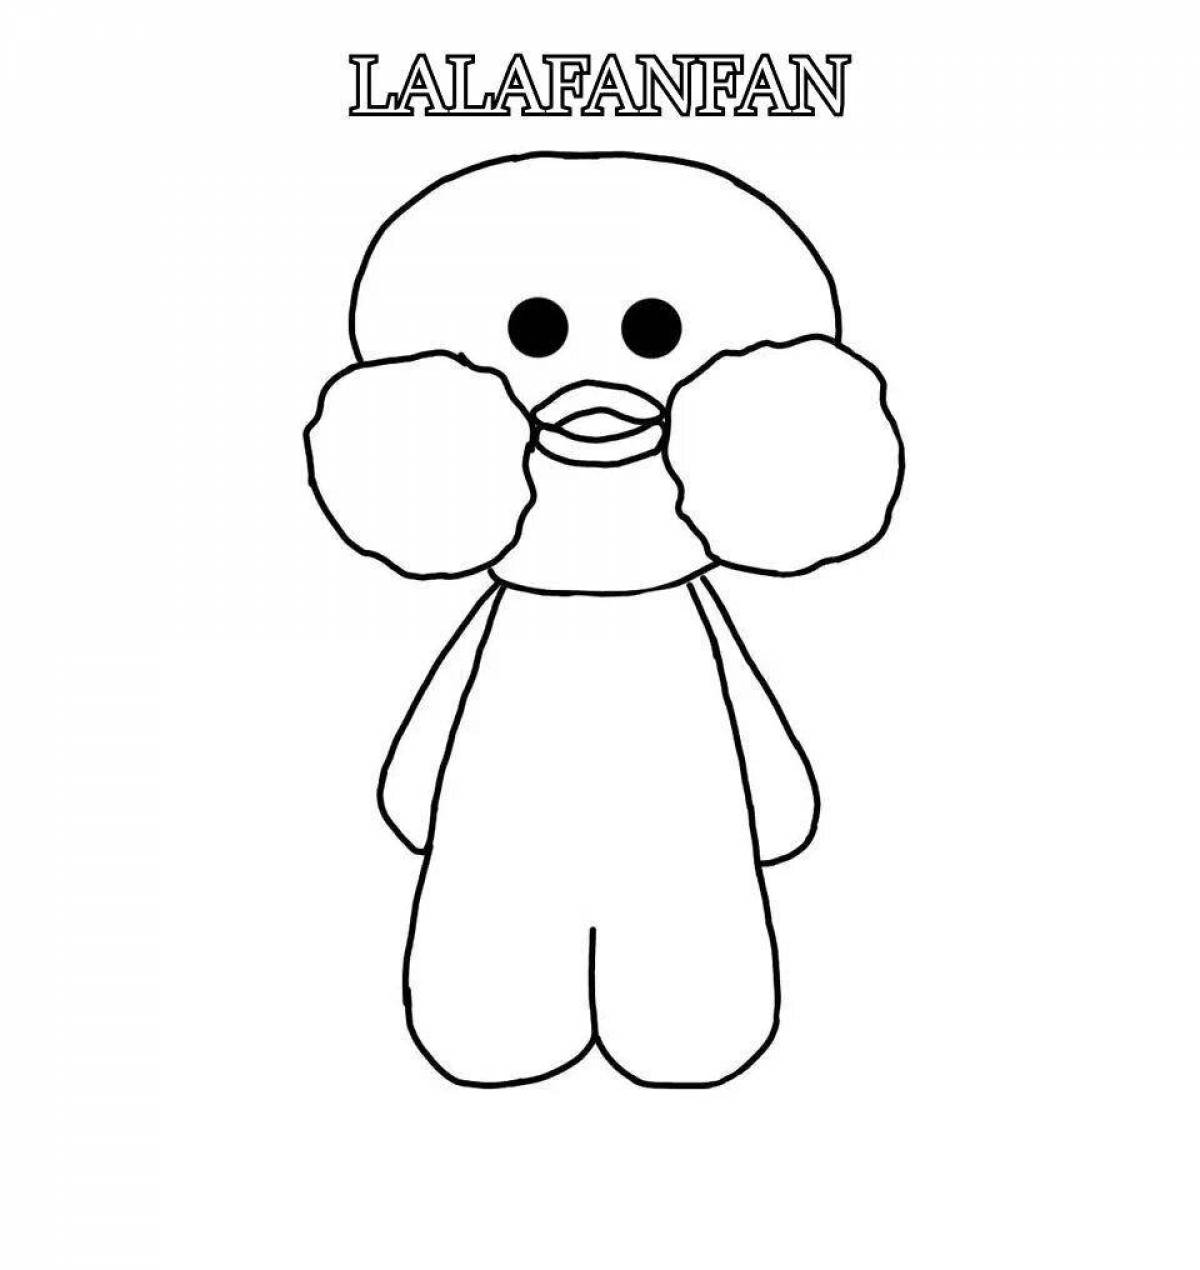 Lalafanfan funny duck without clothes